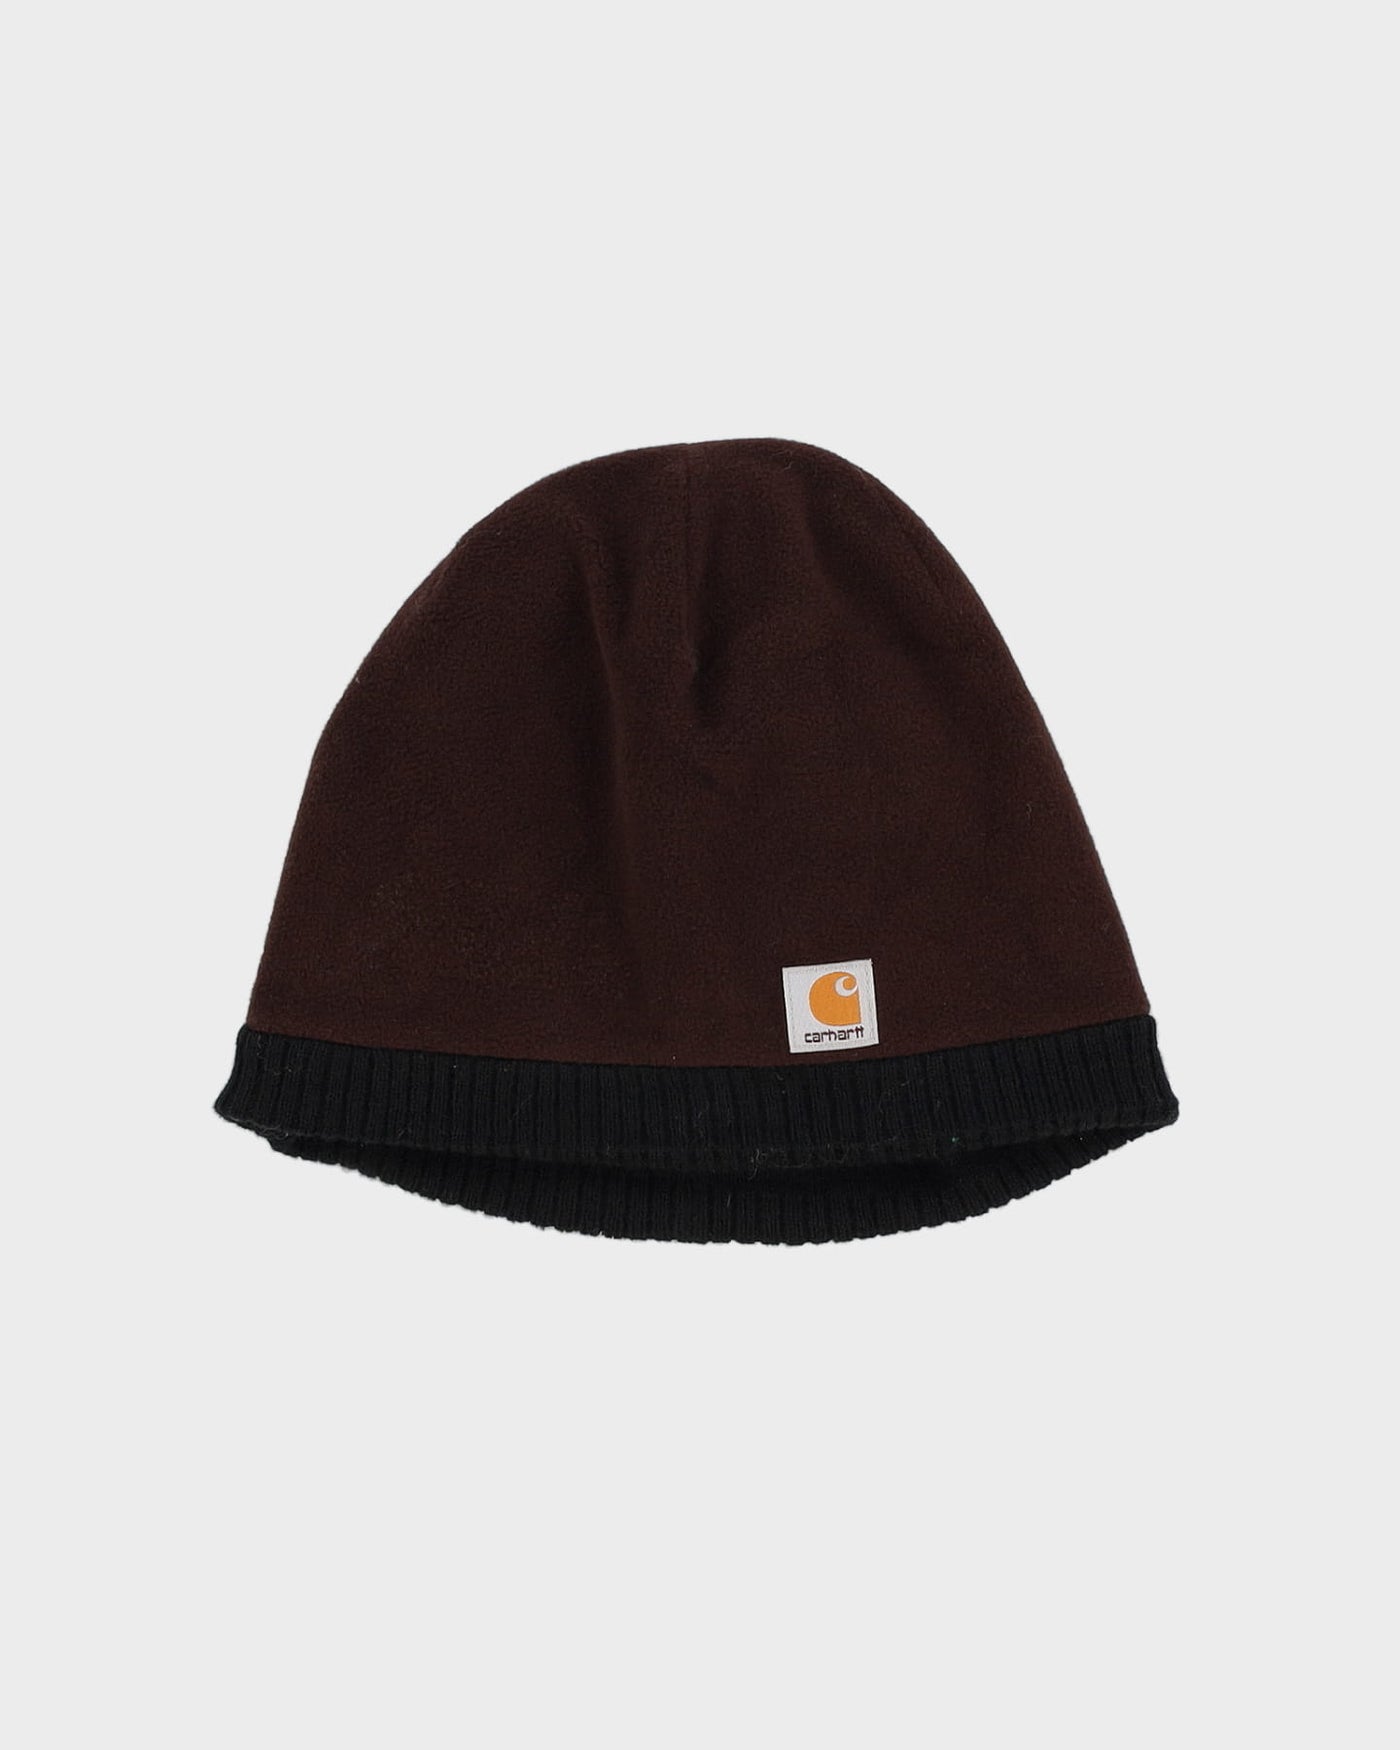 Carhartt New With Tags Black / Brown Reversible Beanie